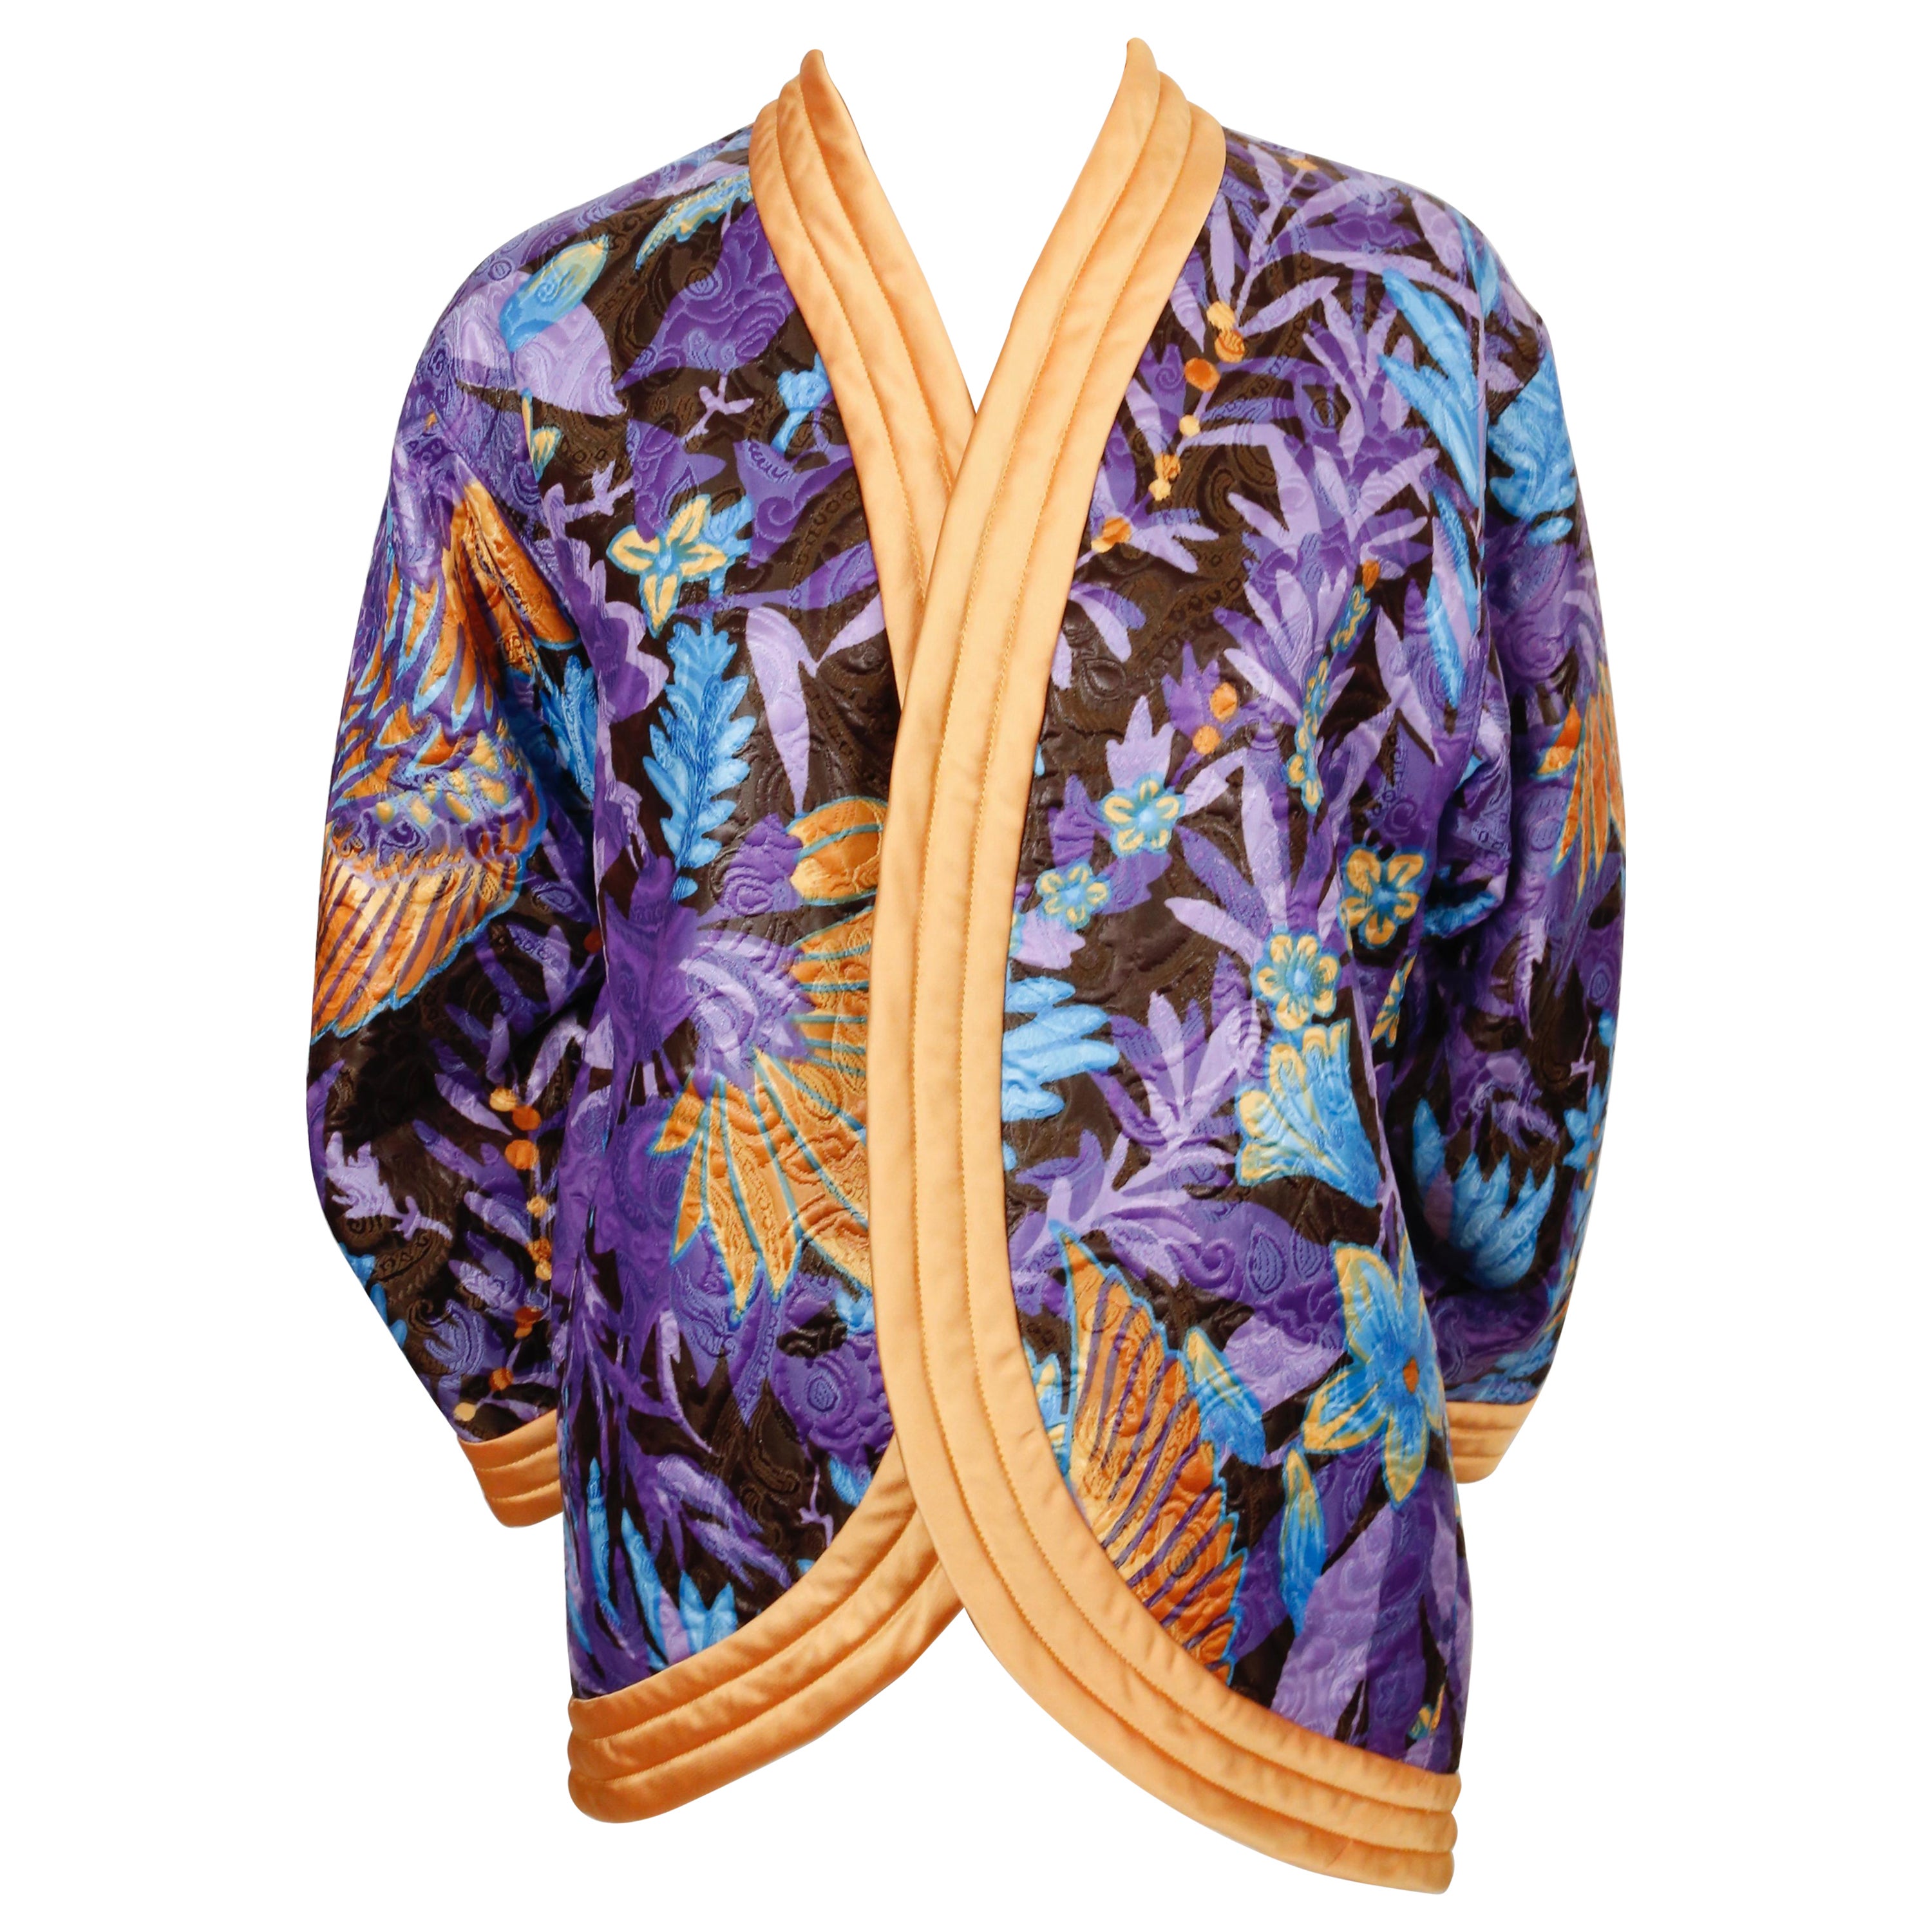 1979 YVES SAINT LAURENT black satin kimono jacket with Asian embroidery For Sale